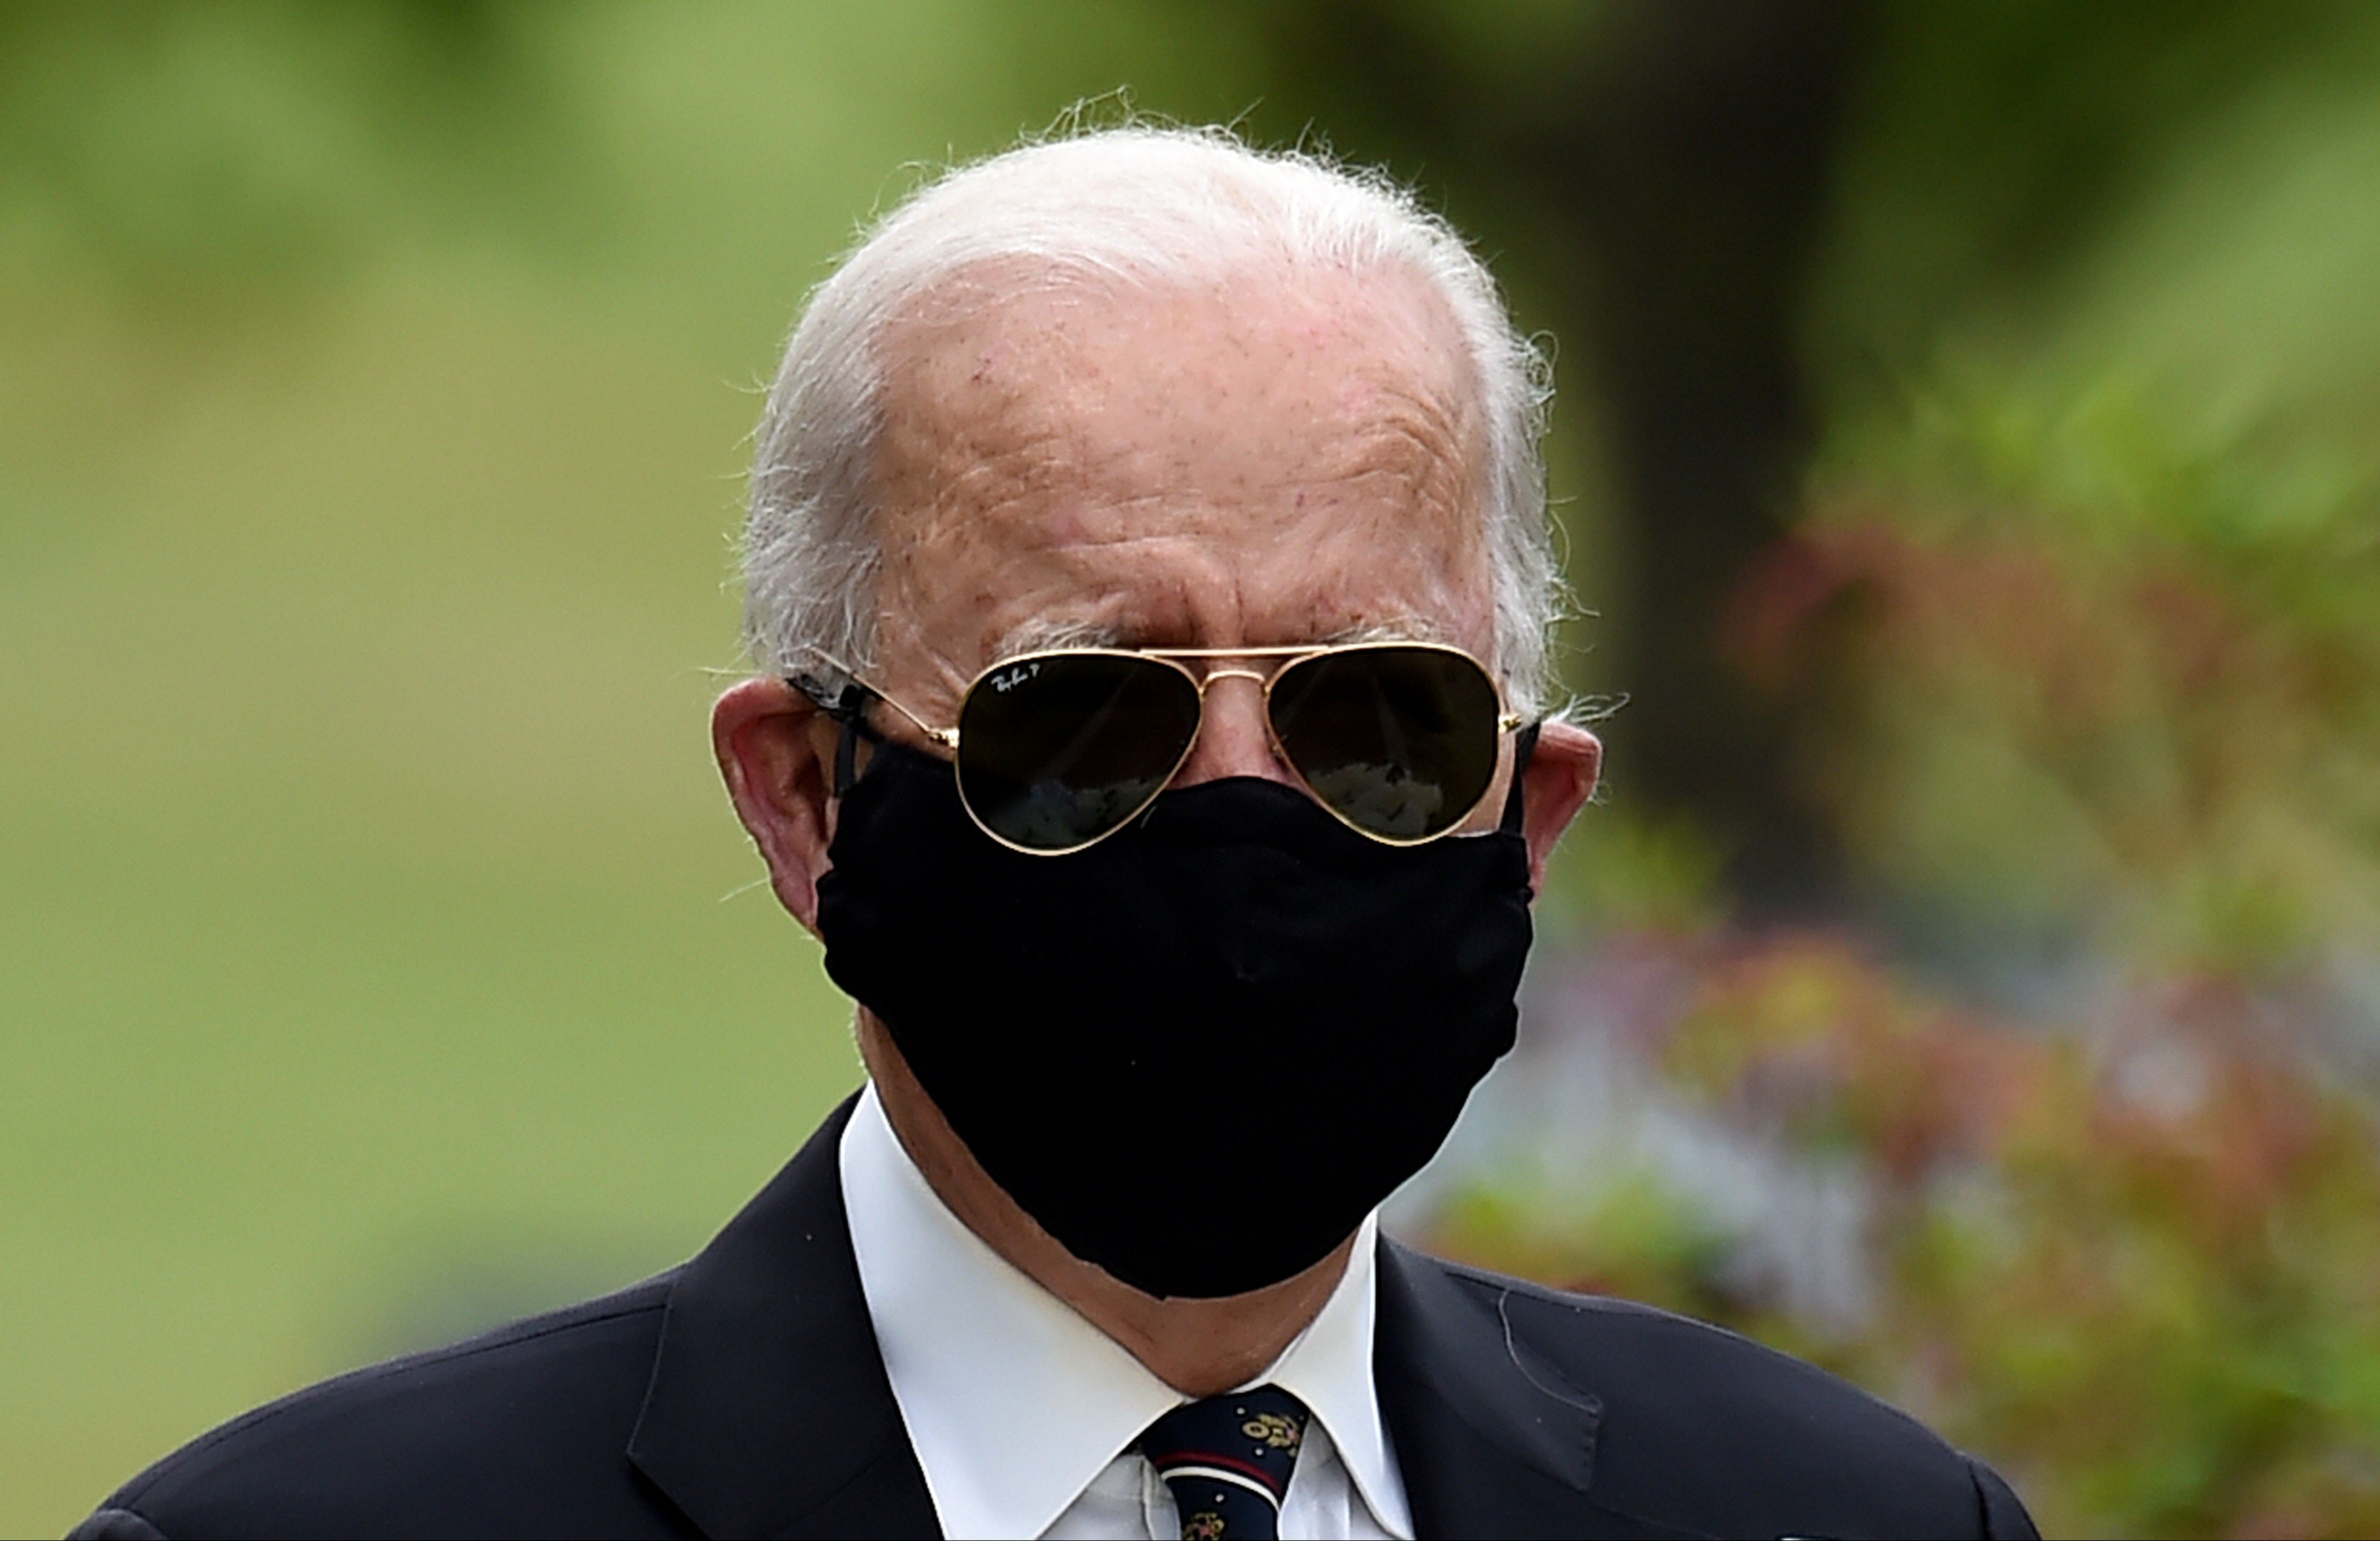 Democratic presidential candidate and former US Vice President Joe Biden. (AFP Photo)